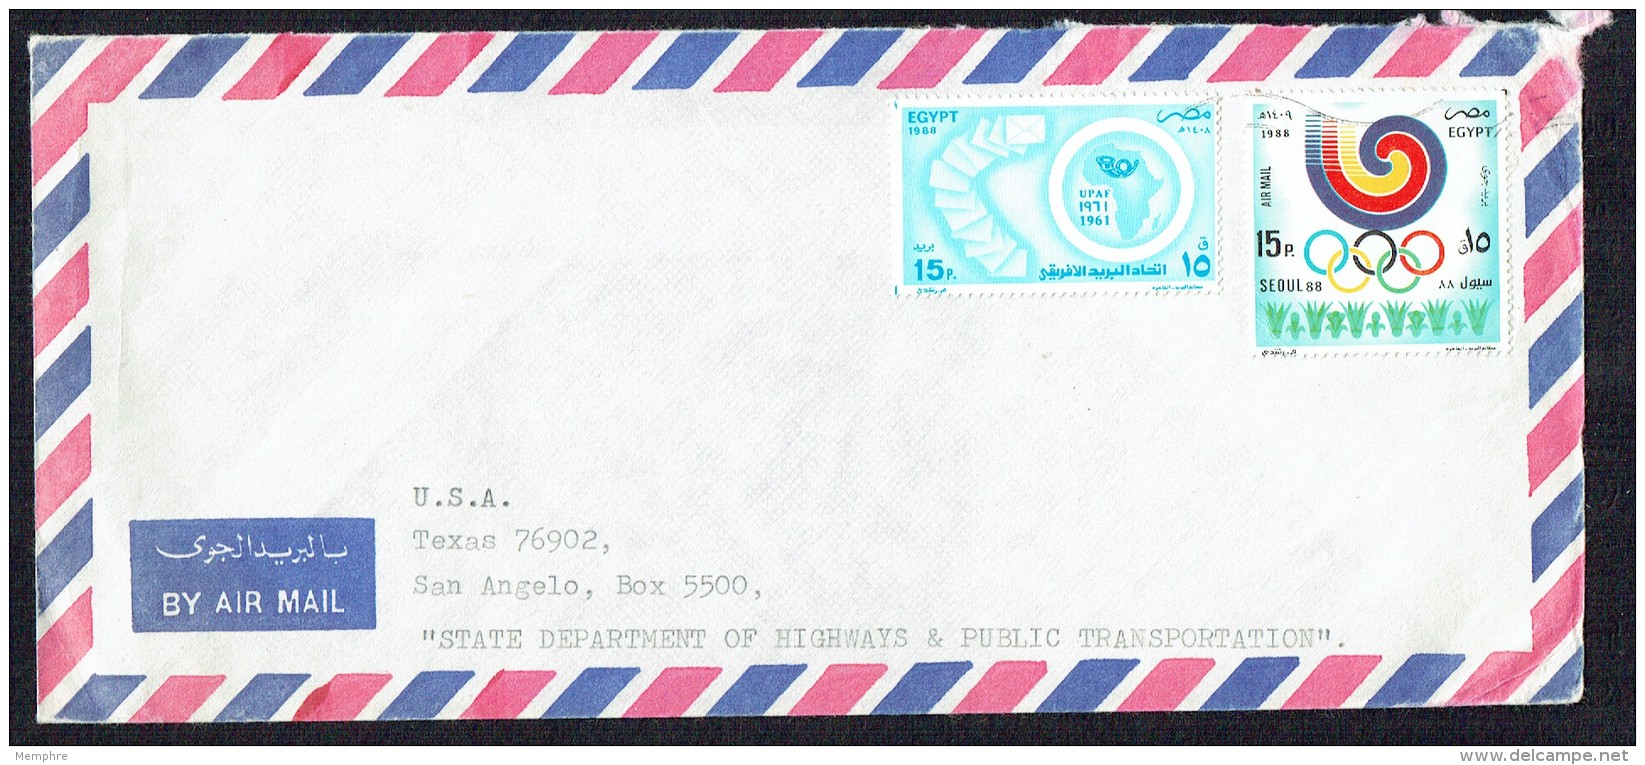 Air Letter To USA  African Postal Union, Seoul Olympic Games - Lettres & Documents